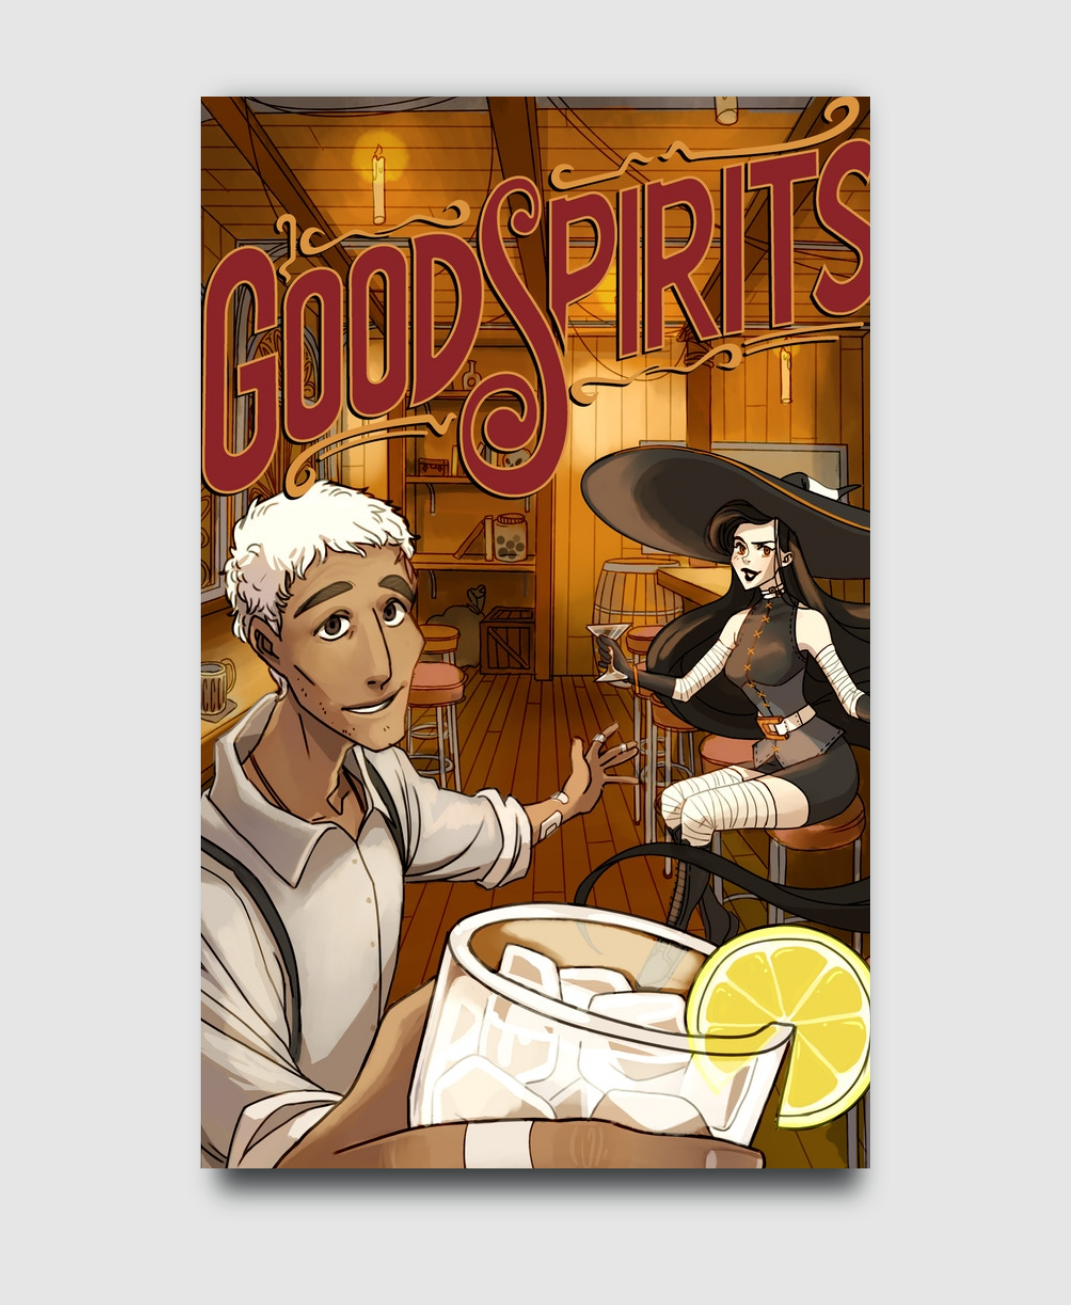 Book cover design for Good Spirits. Designed by Johnery